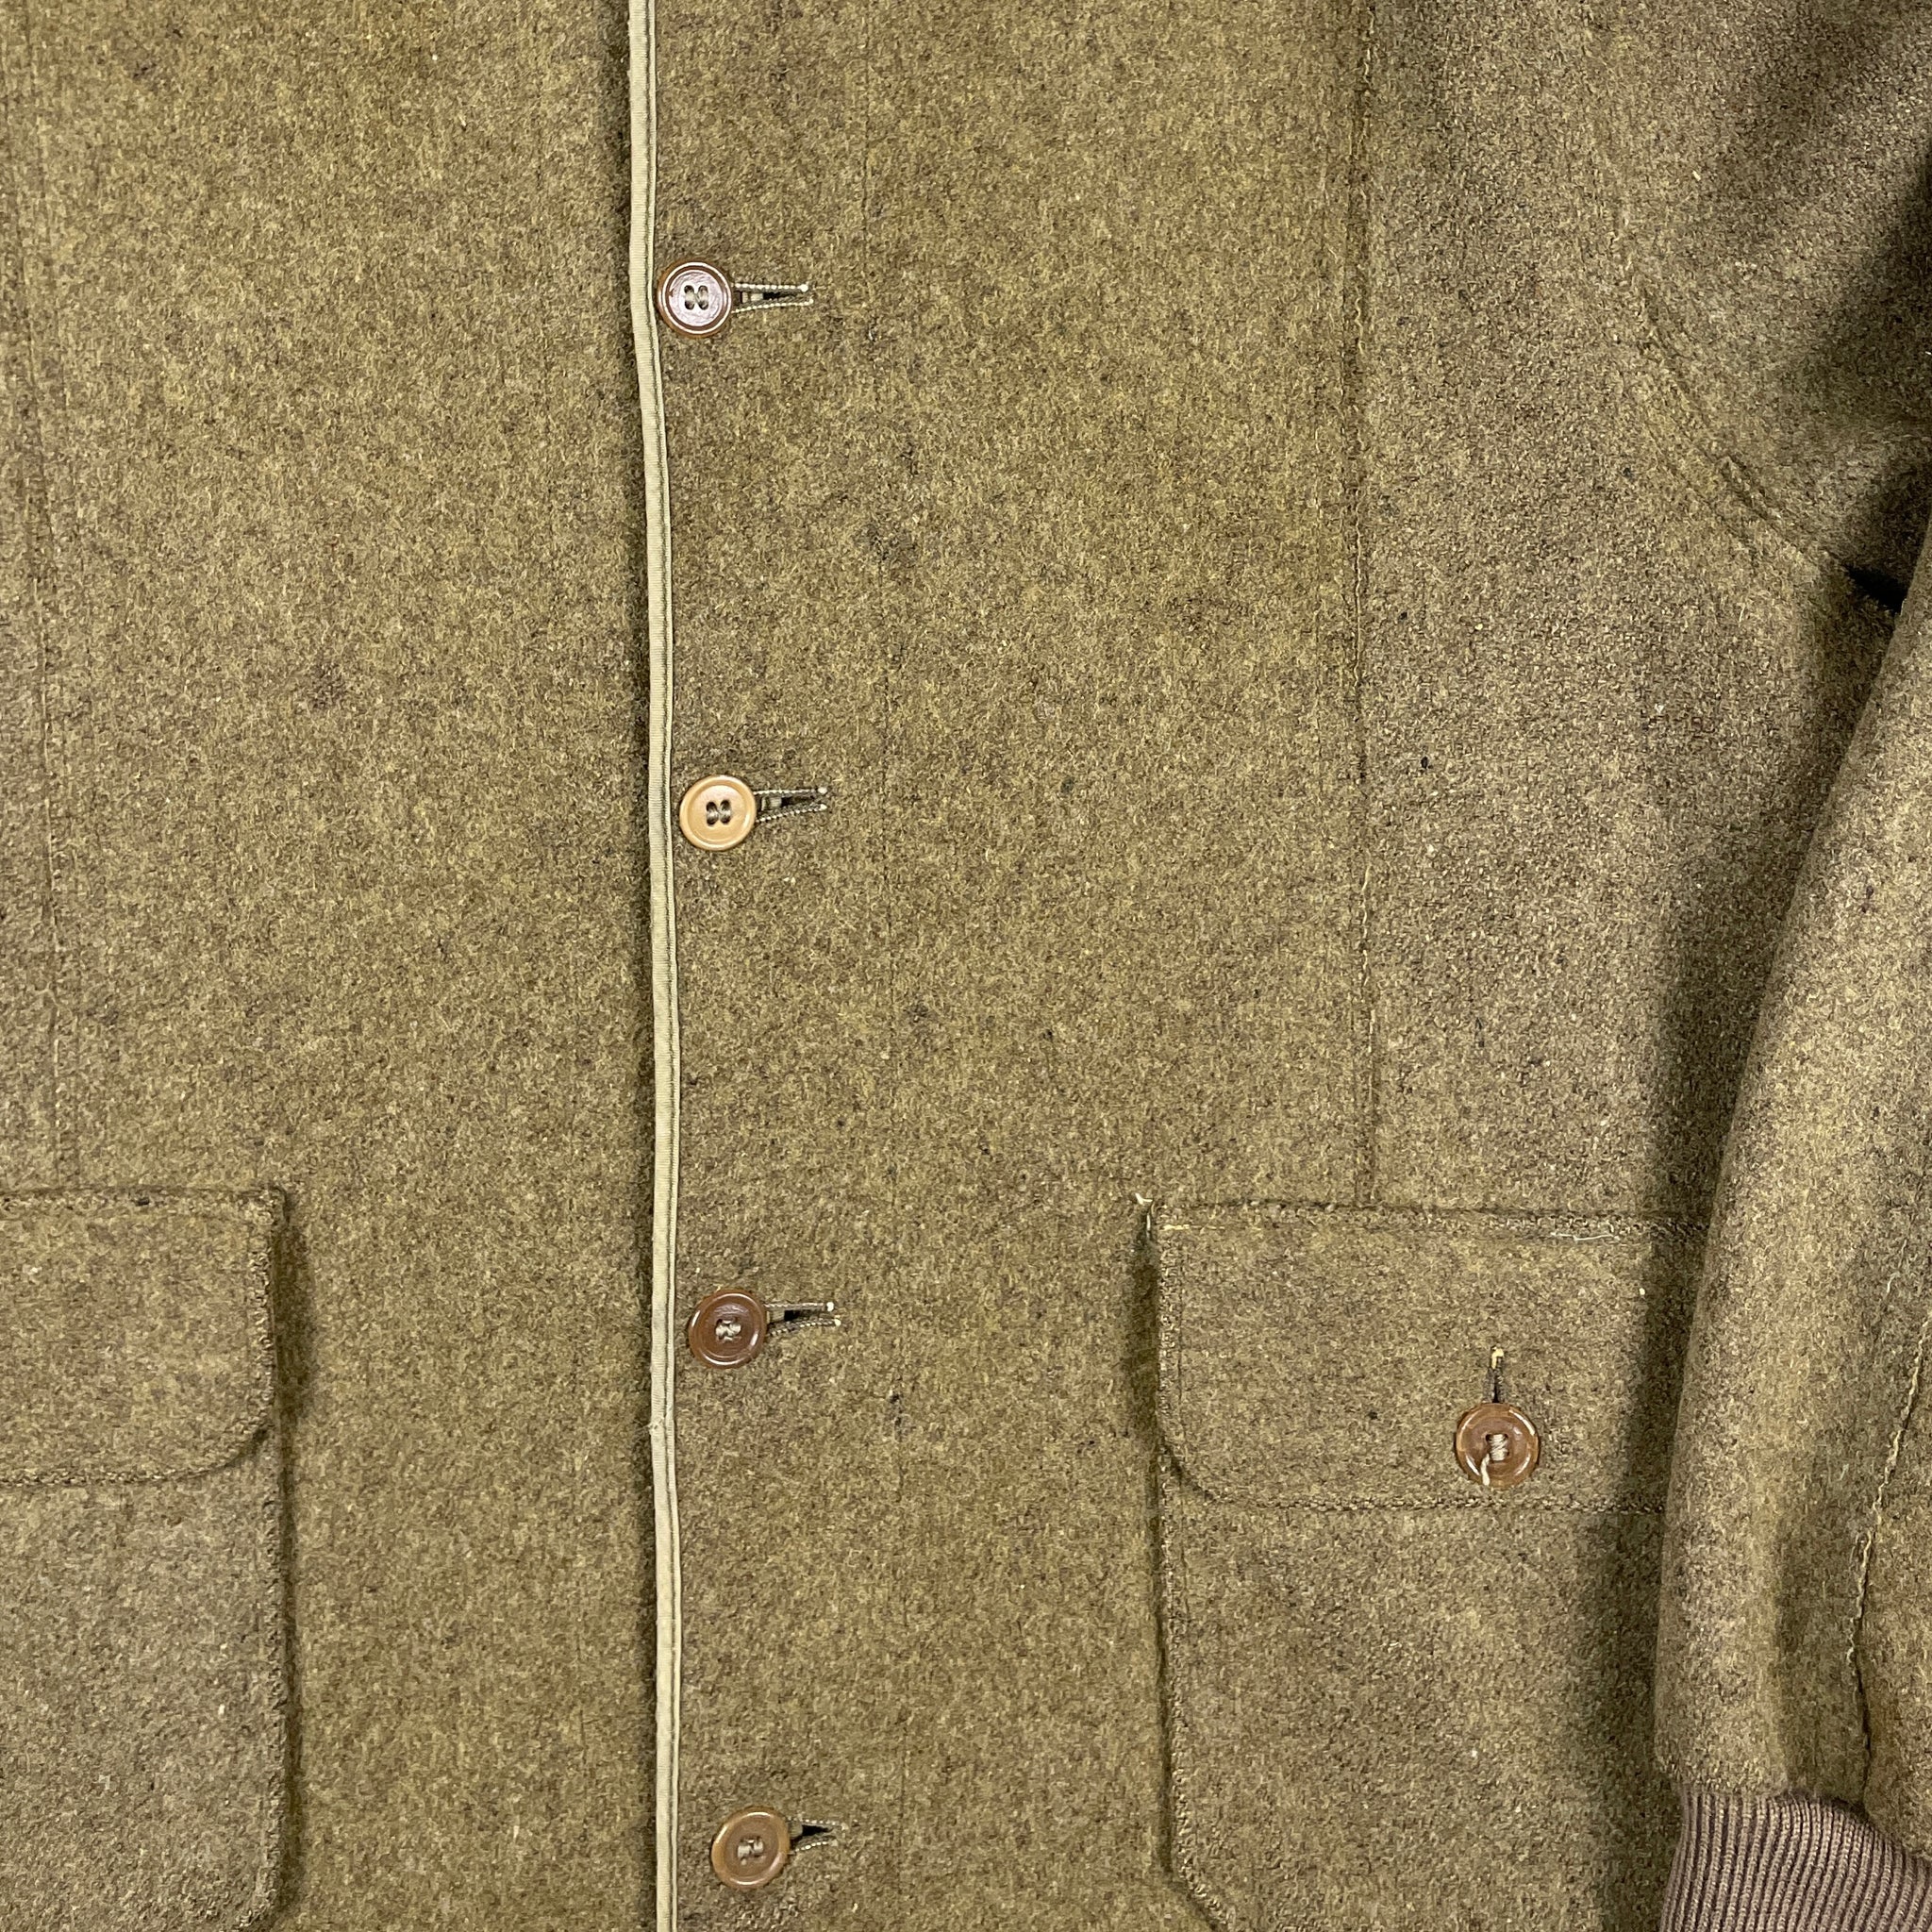 Civilian Conservation Corps 1930s A1 Wool Work Jacket – The 